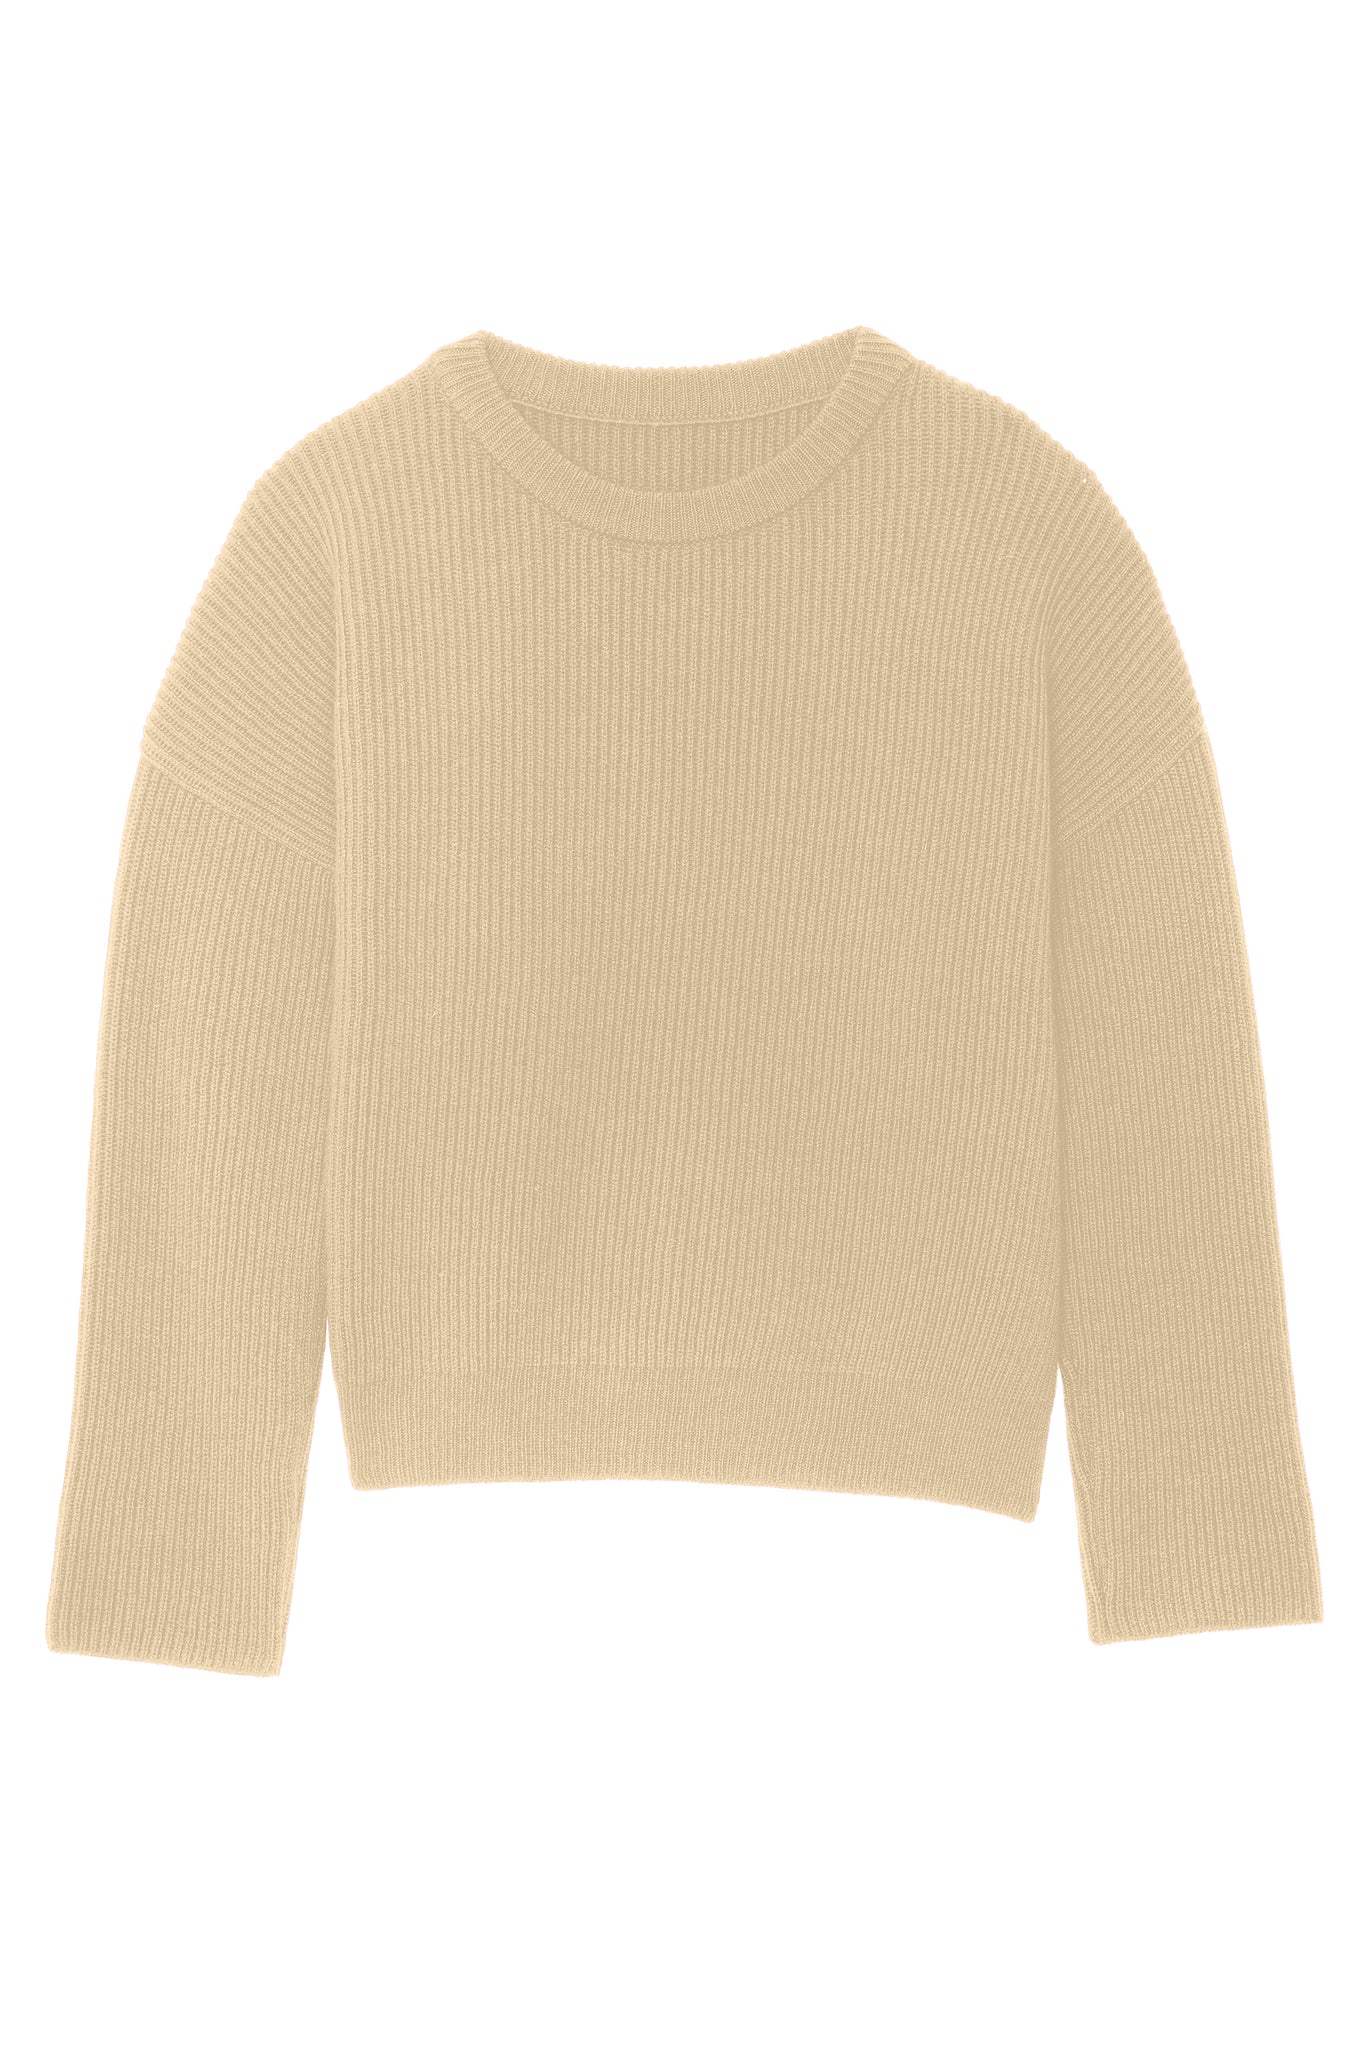 Ribbed cashmere sweater with circular neckline.